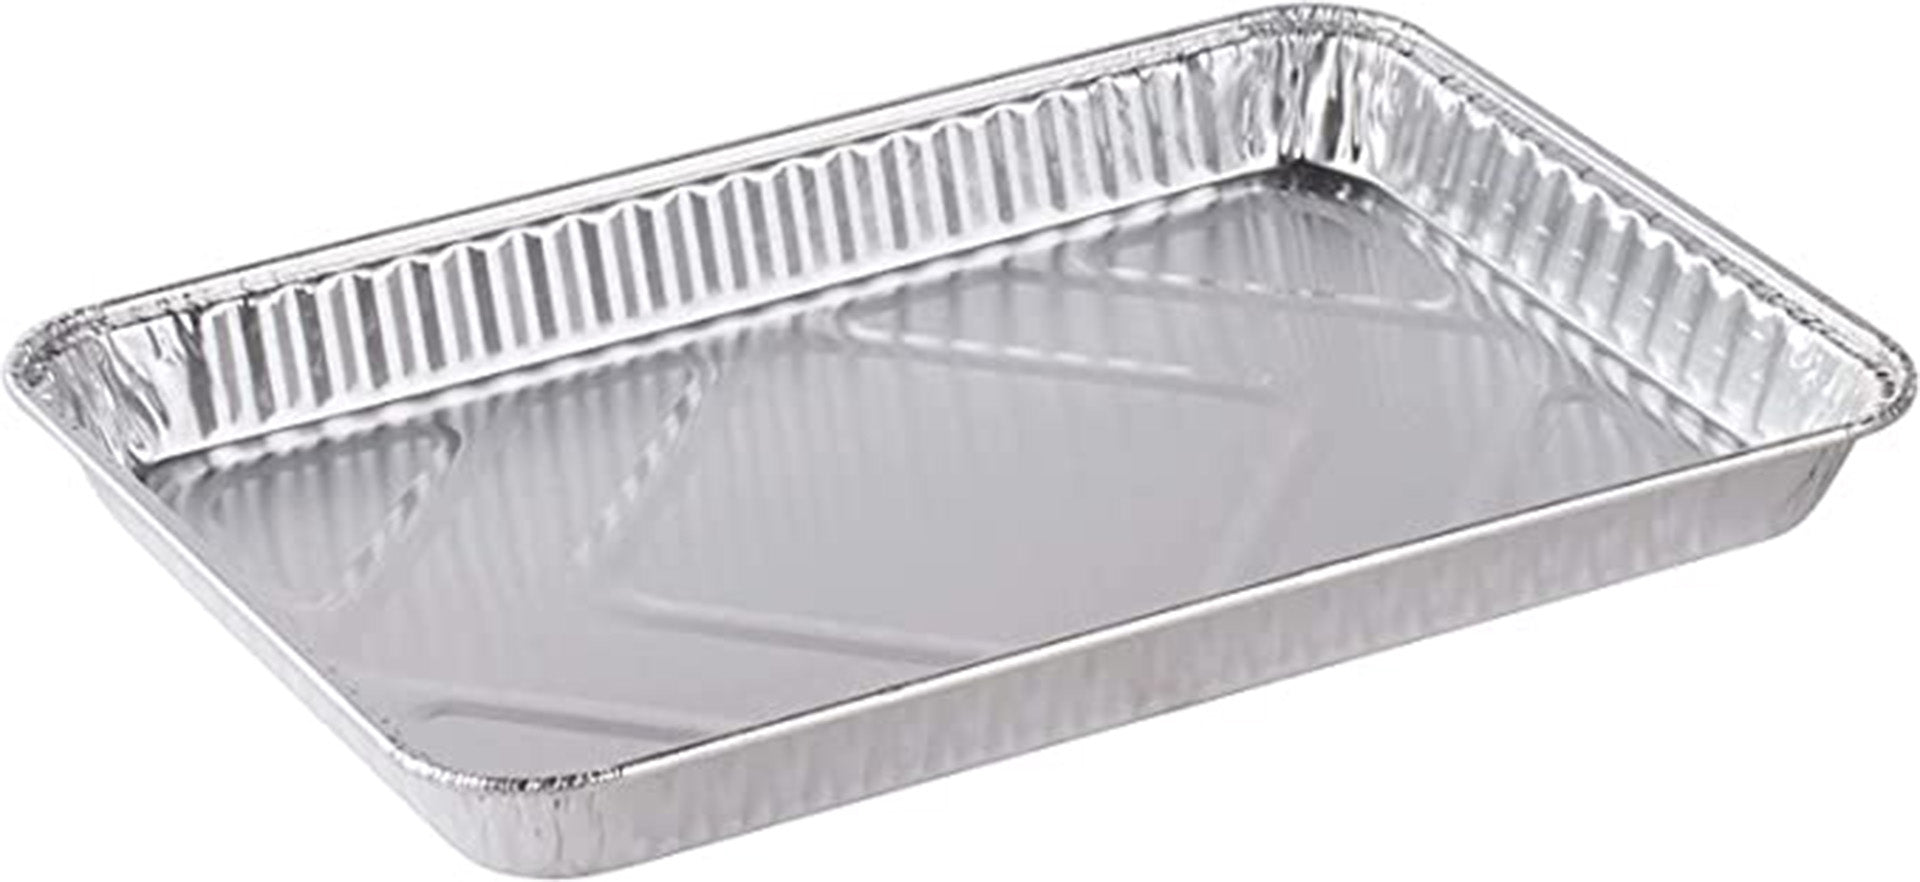 Disposable Aluminum Foil Cookie Sheet with Dome Lid, 17-5/8 x 12-13/16 |  25 Ct.